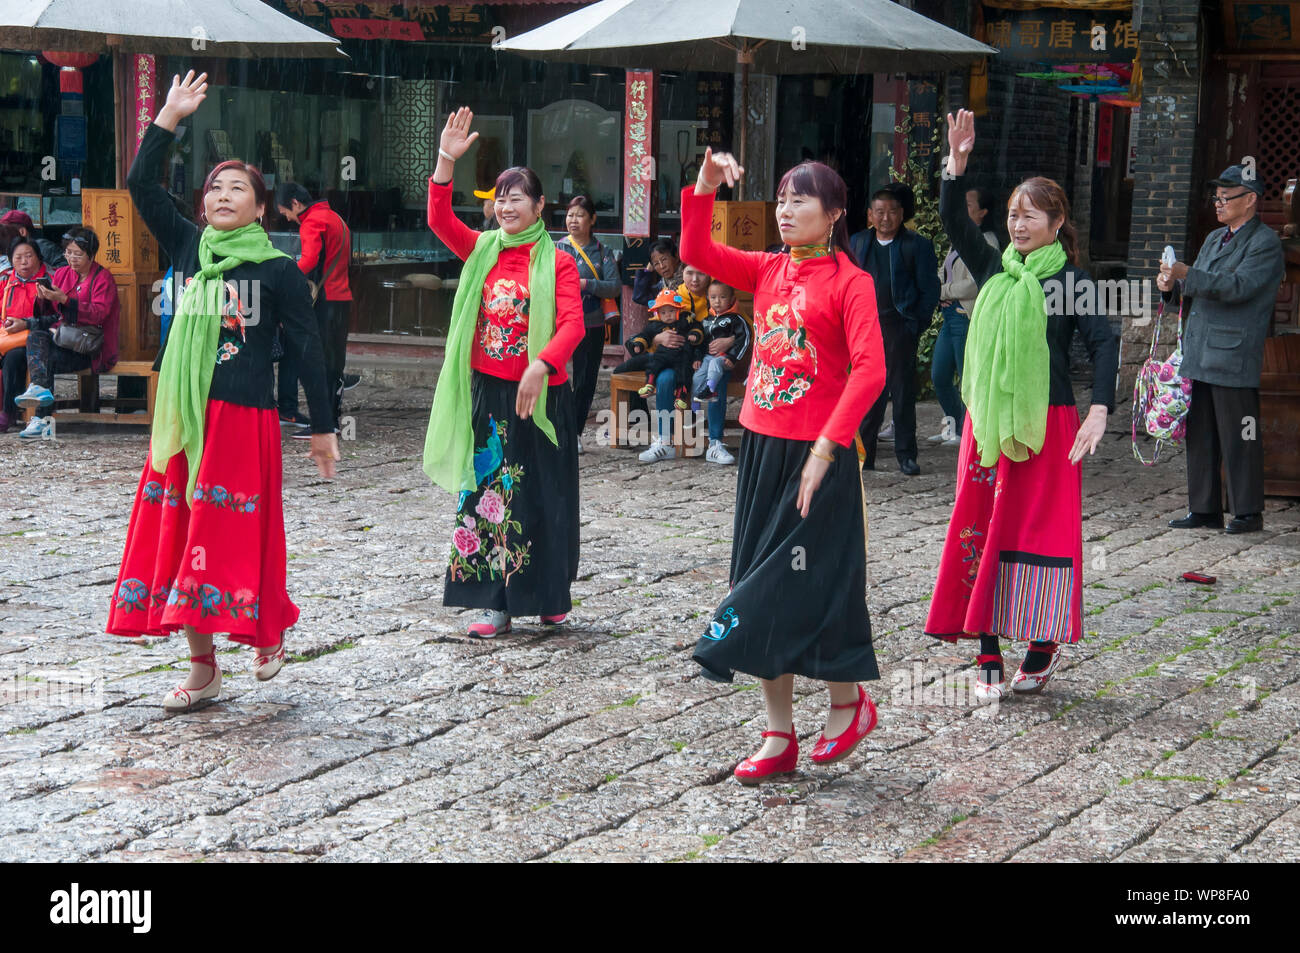 Female folk dancers perform in a town square in the Old Quarter of Lijiang, Yunnan, China Stock Photo